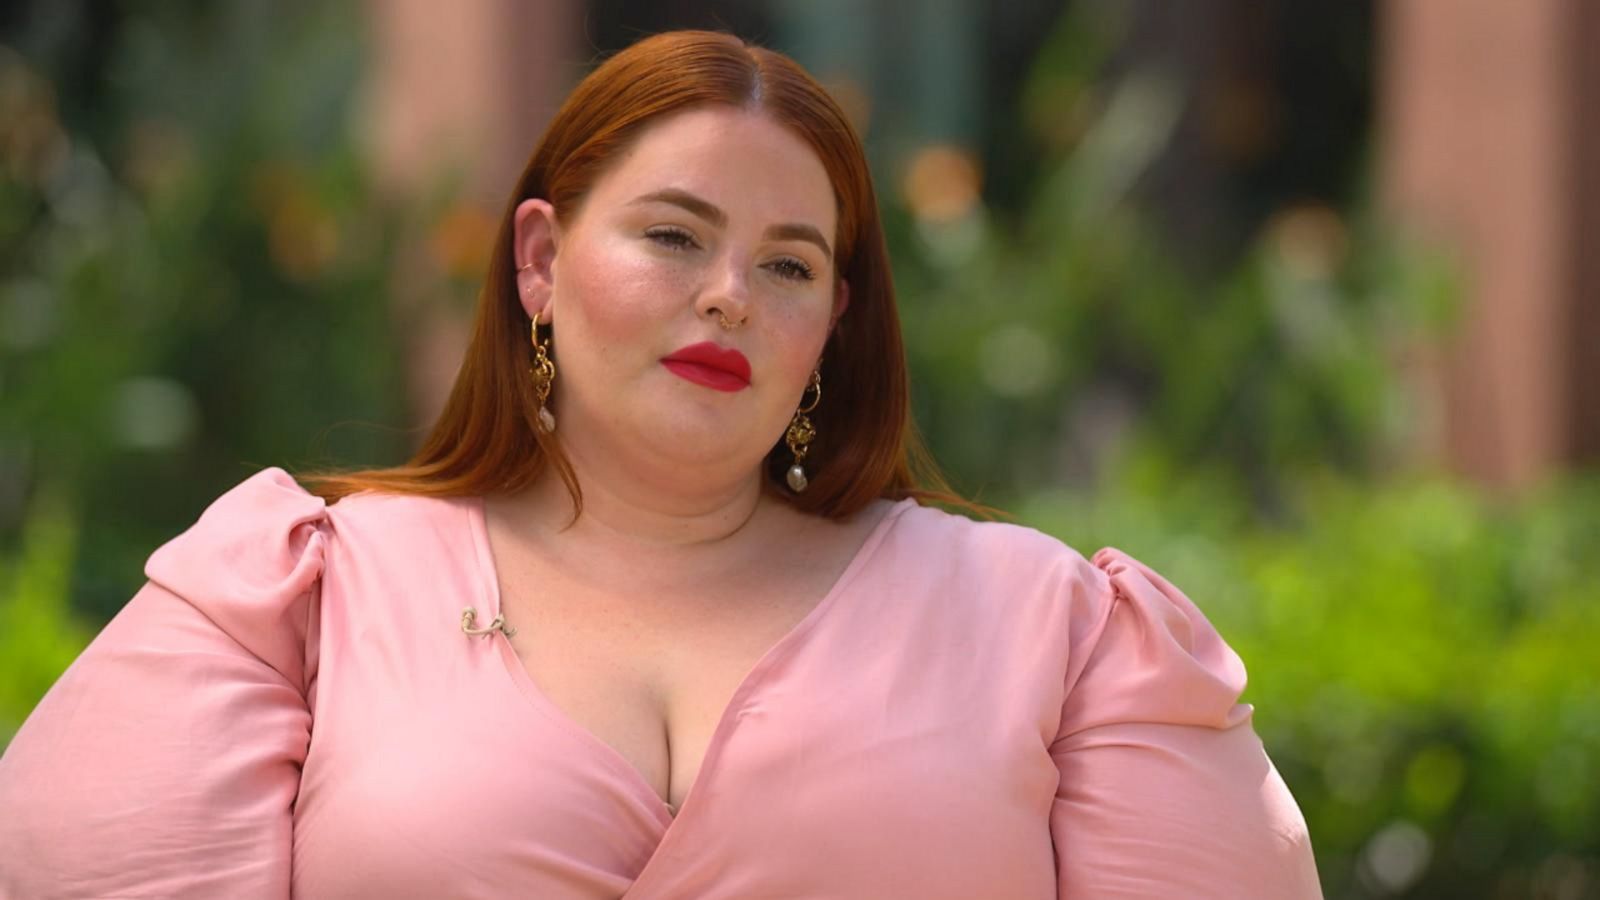 Body-positivity model Tess Holliday opens up about struggle with anorexia -  Good Morning America